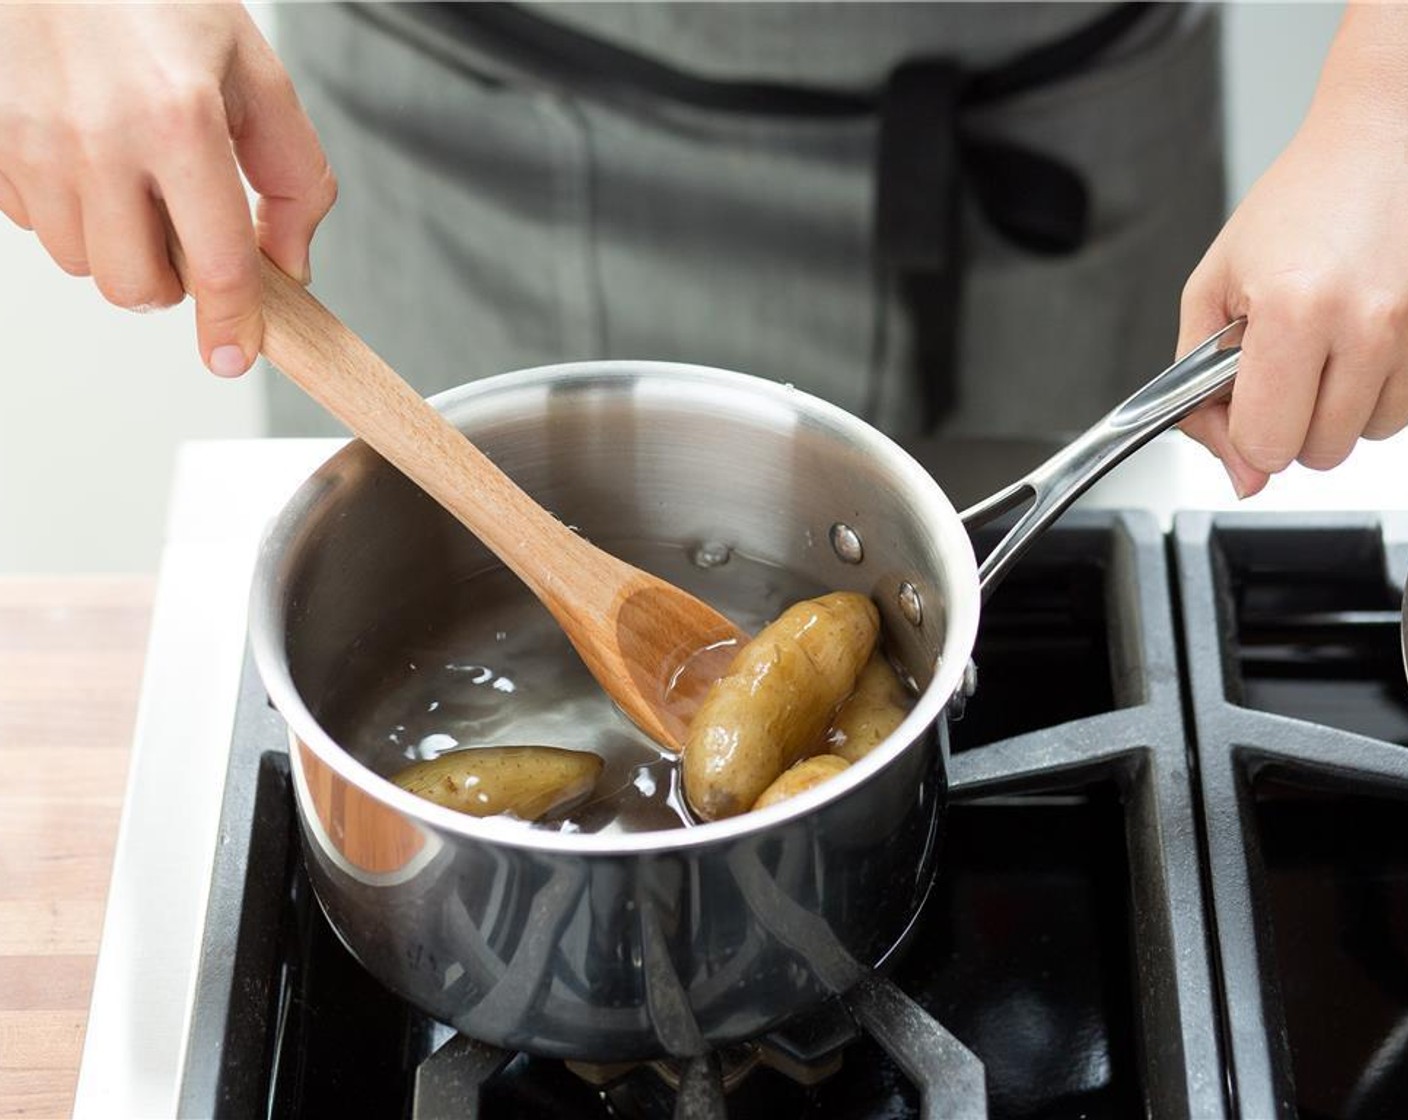 step 2 Put Fingerling Potatoes (1 1/2 cups) and Salt (1 tsp) in a medium saucepan and fill with enough water to cover potatoes. Place the pot over high heat and bring to a boil. Once the water is boiling, cook for 14 minutes, or until potatoes are fork tender.